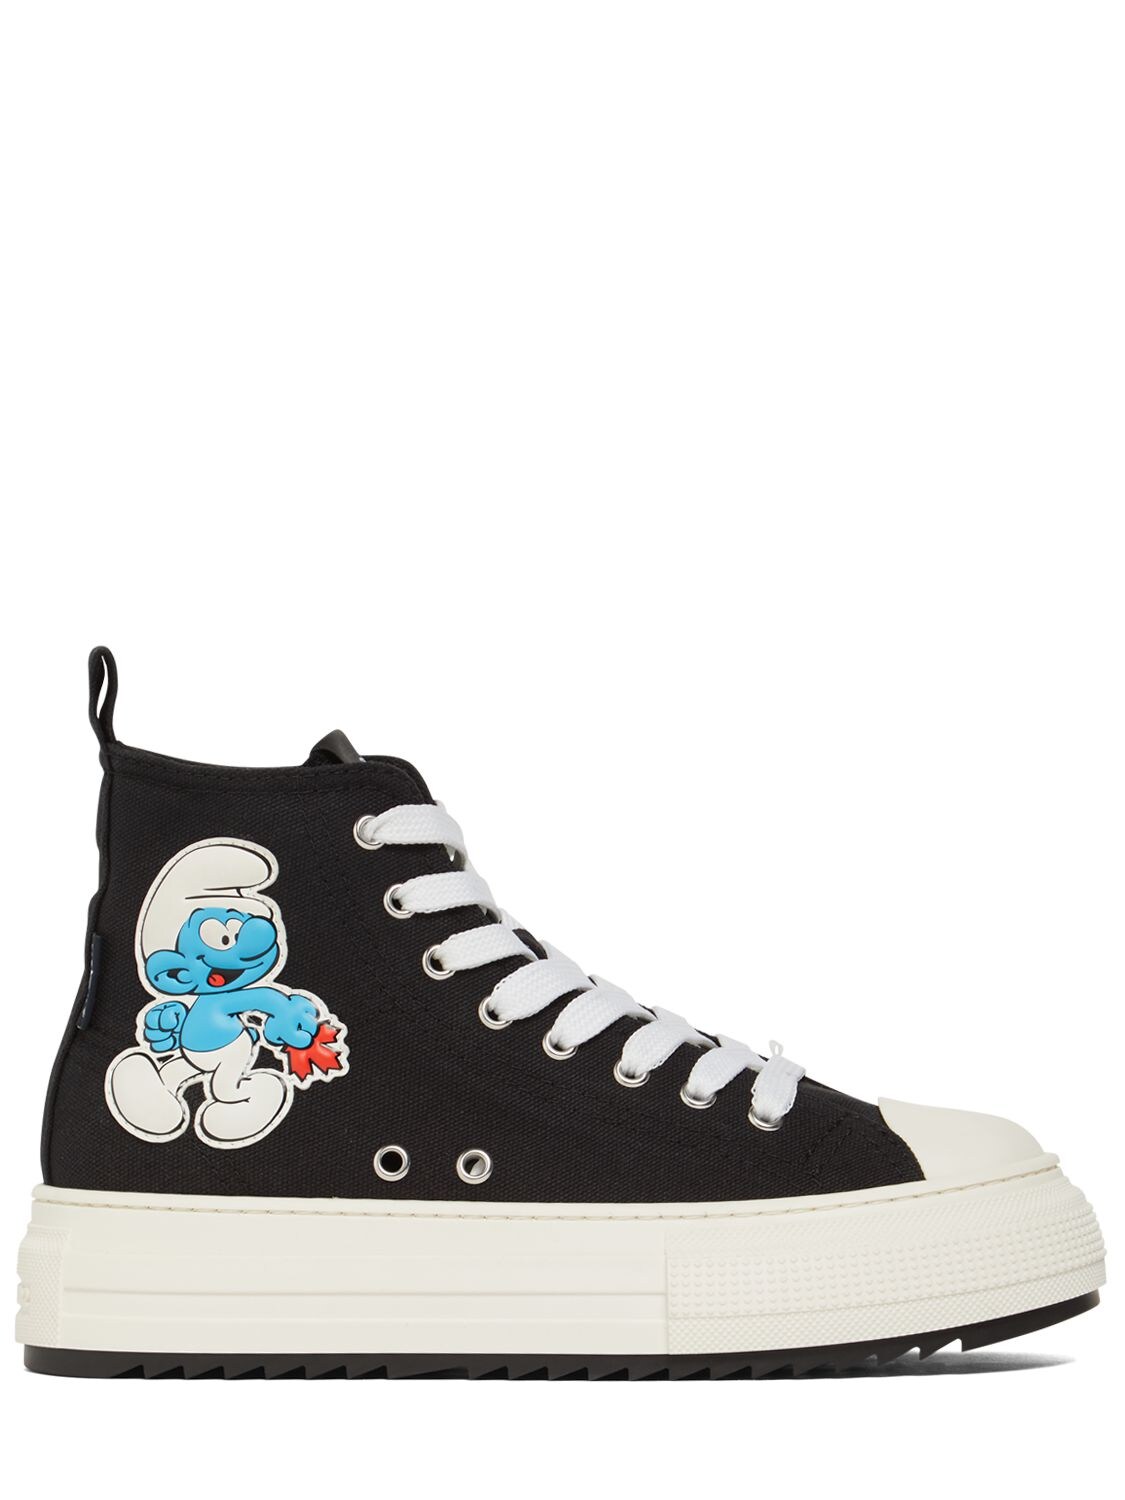 Mm Grounchy Smurfs Canvas Sneakers - DSQUARED2 - Modalova